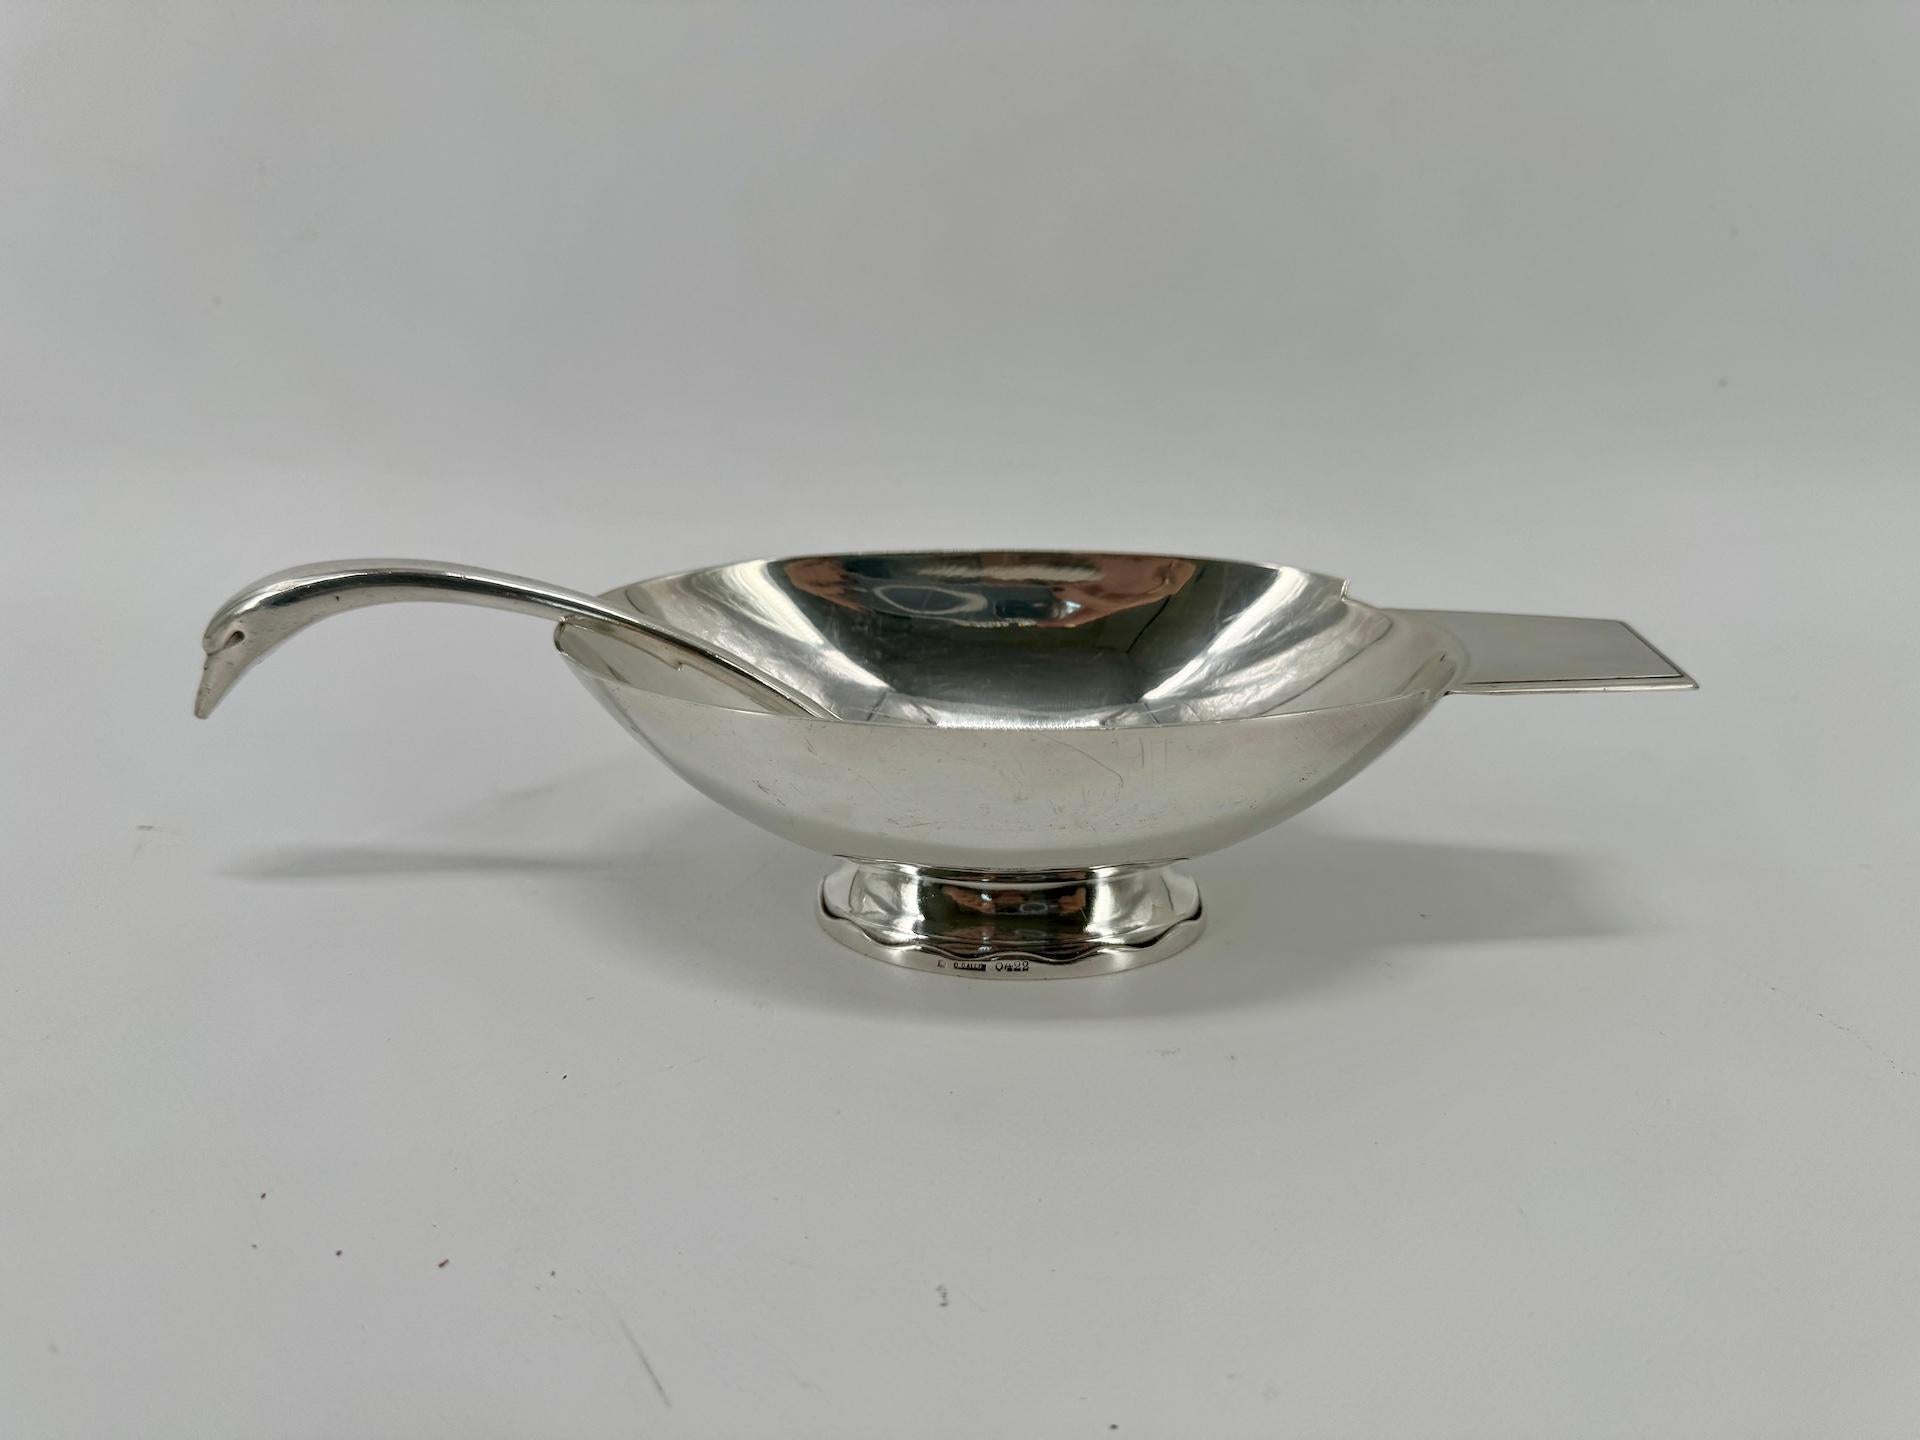 Gallia For Christofle, Gravy Boat ’Swan’ and its spoon By Christian Fjerdingstad For Sale 1